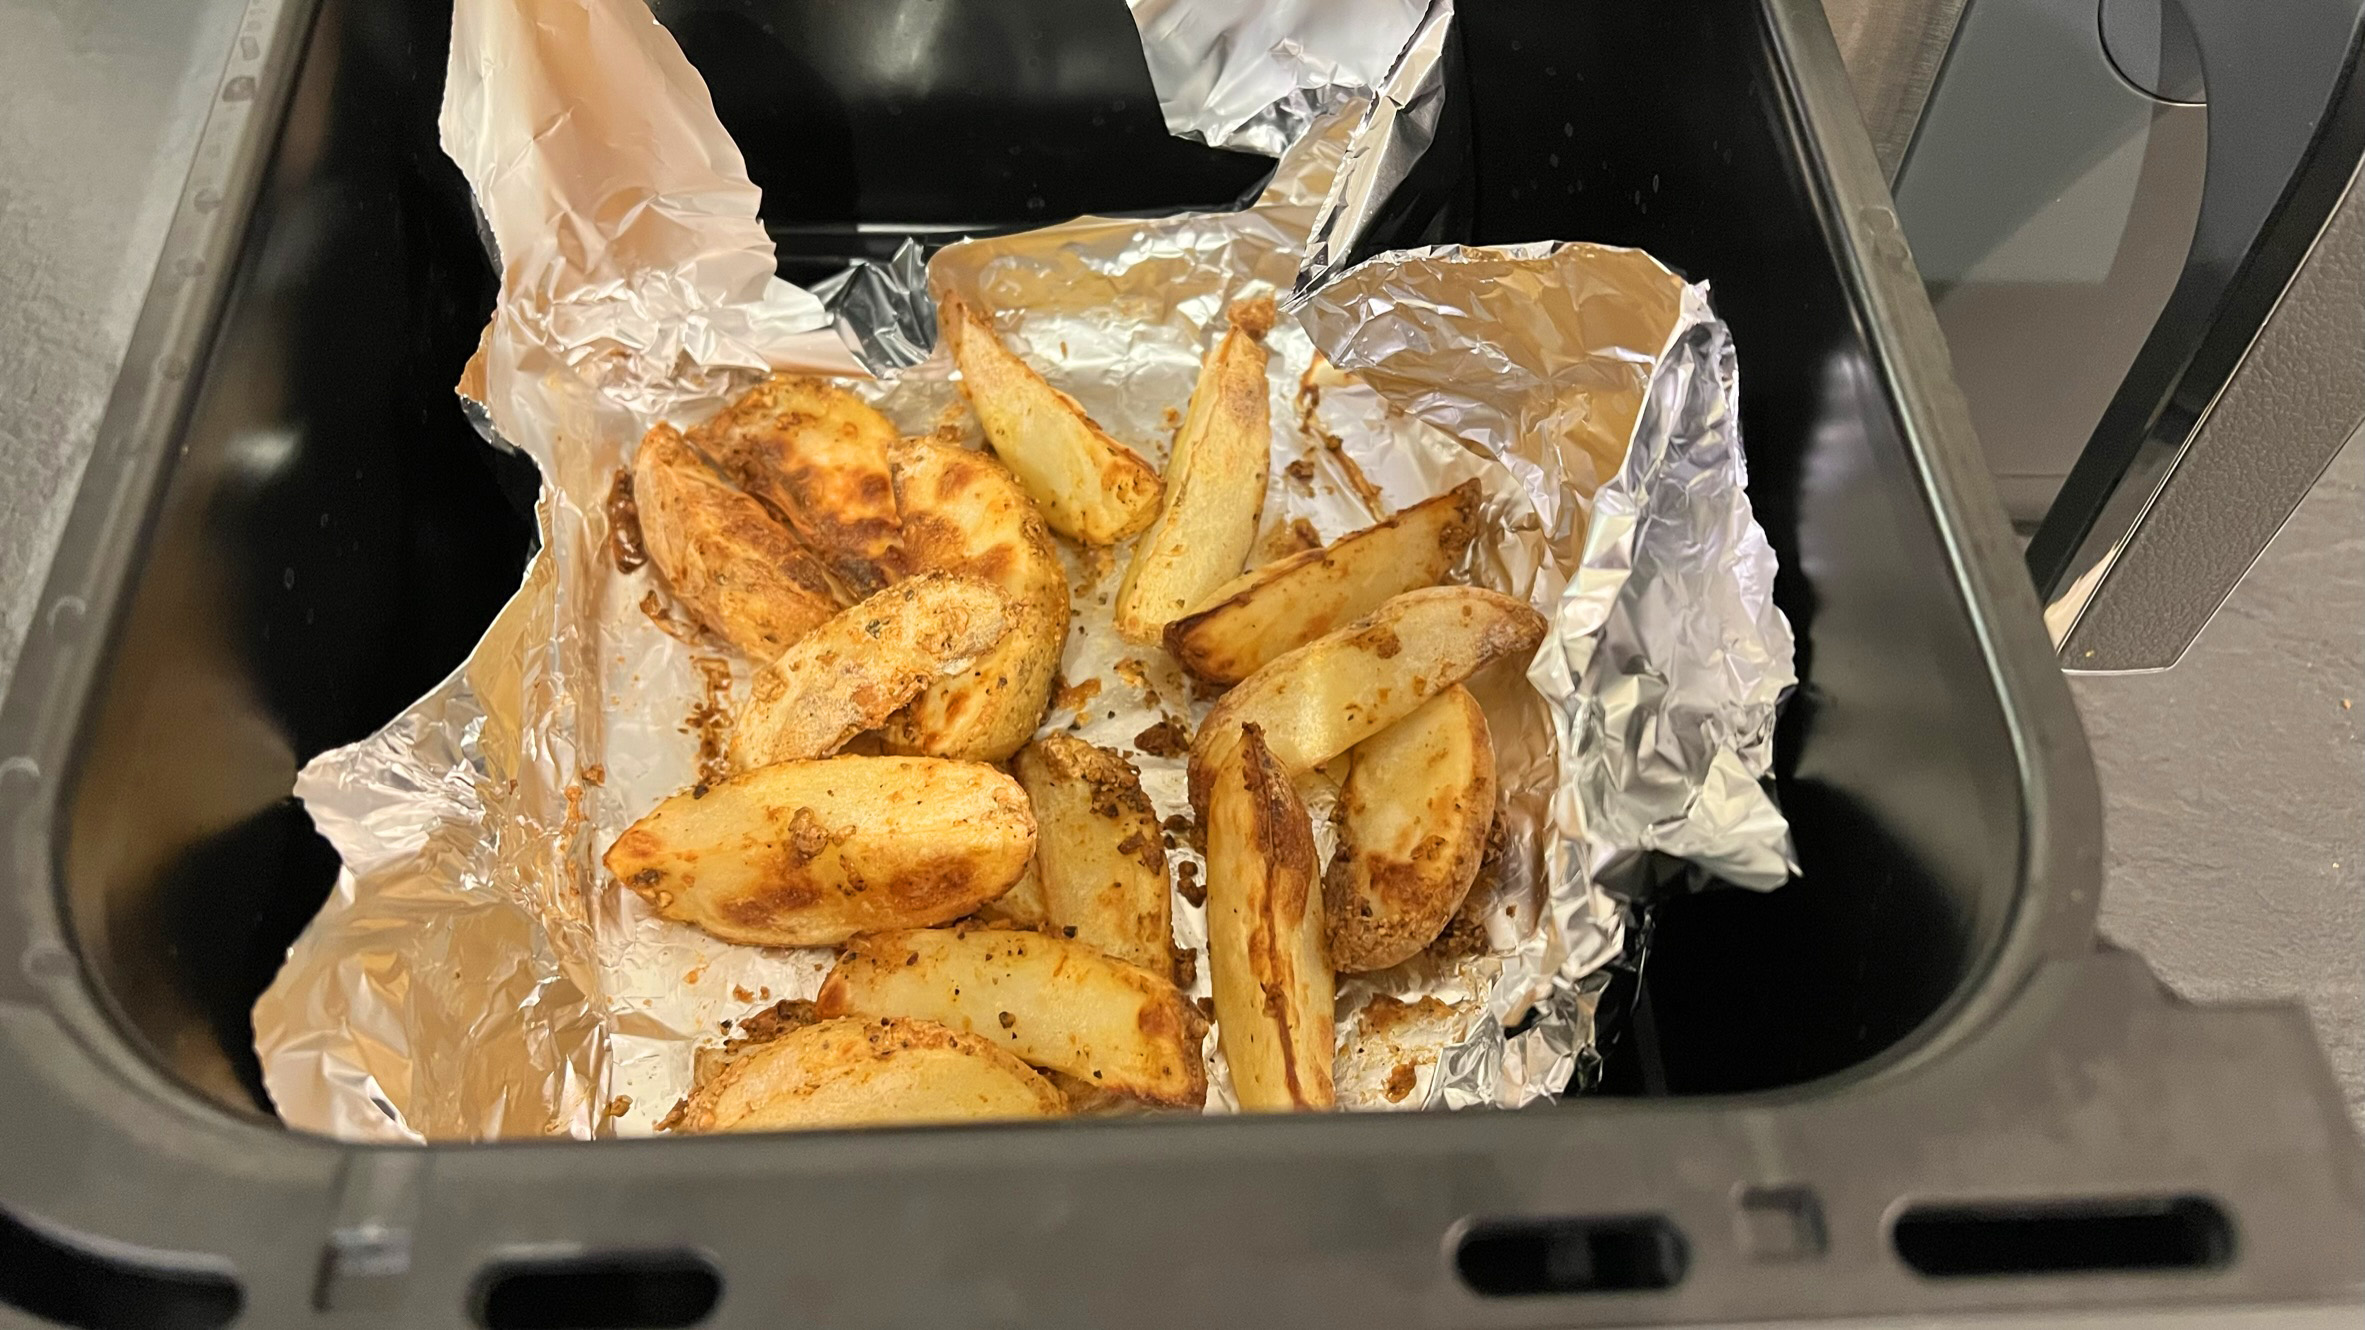 Potato wedges cooked in an air fryer basket